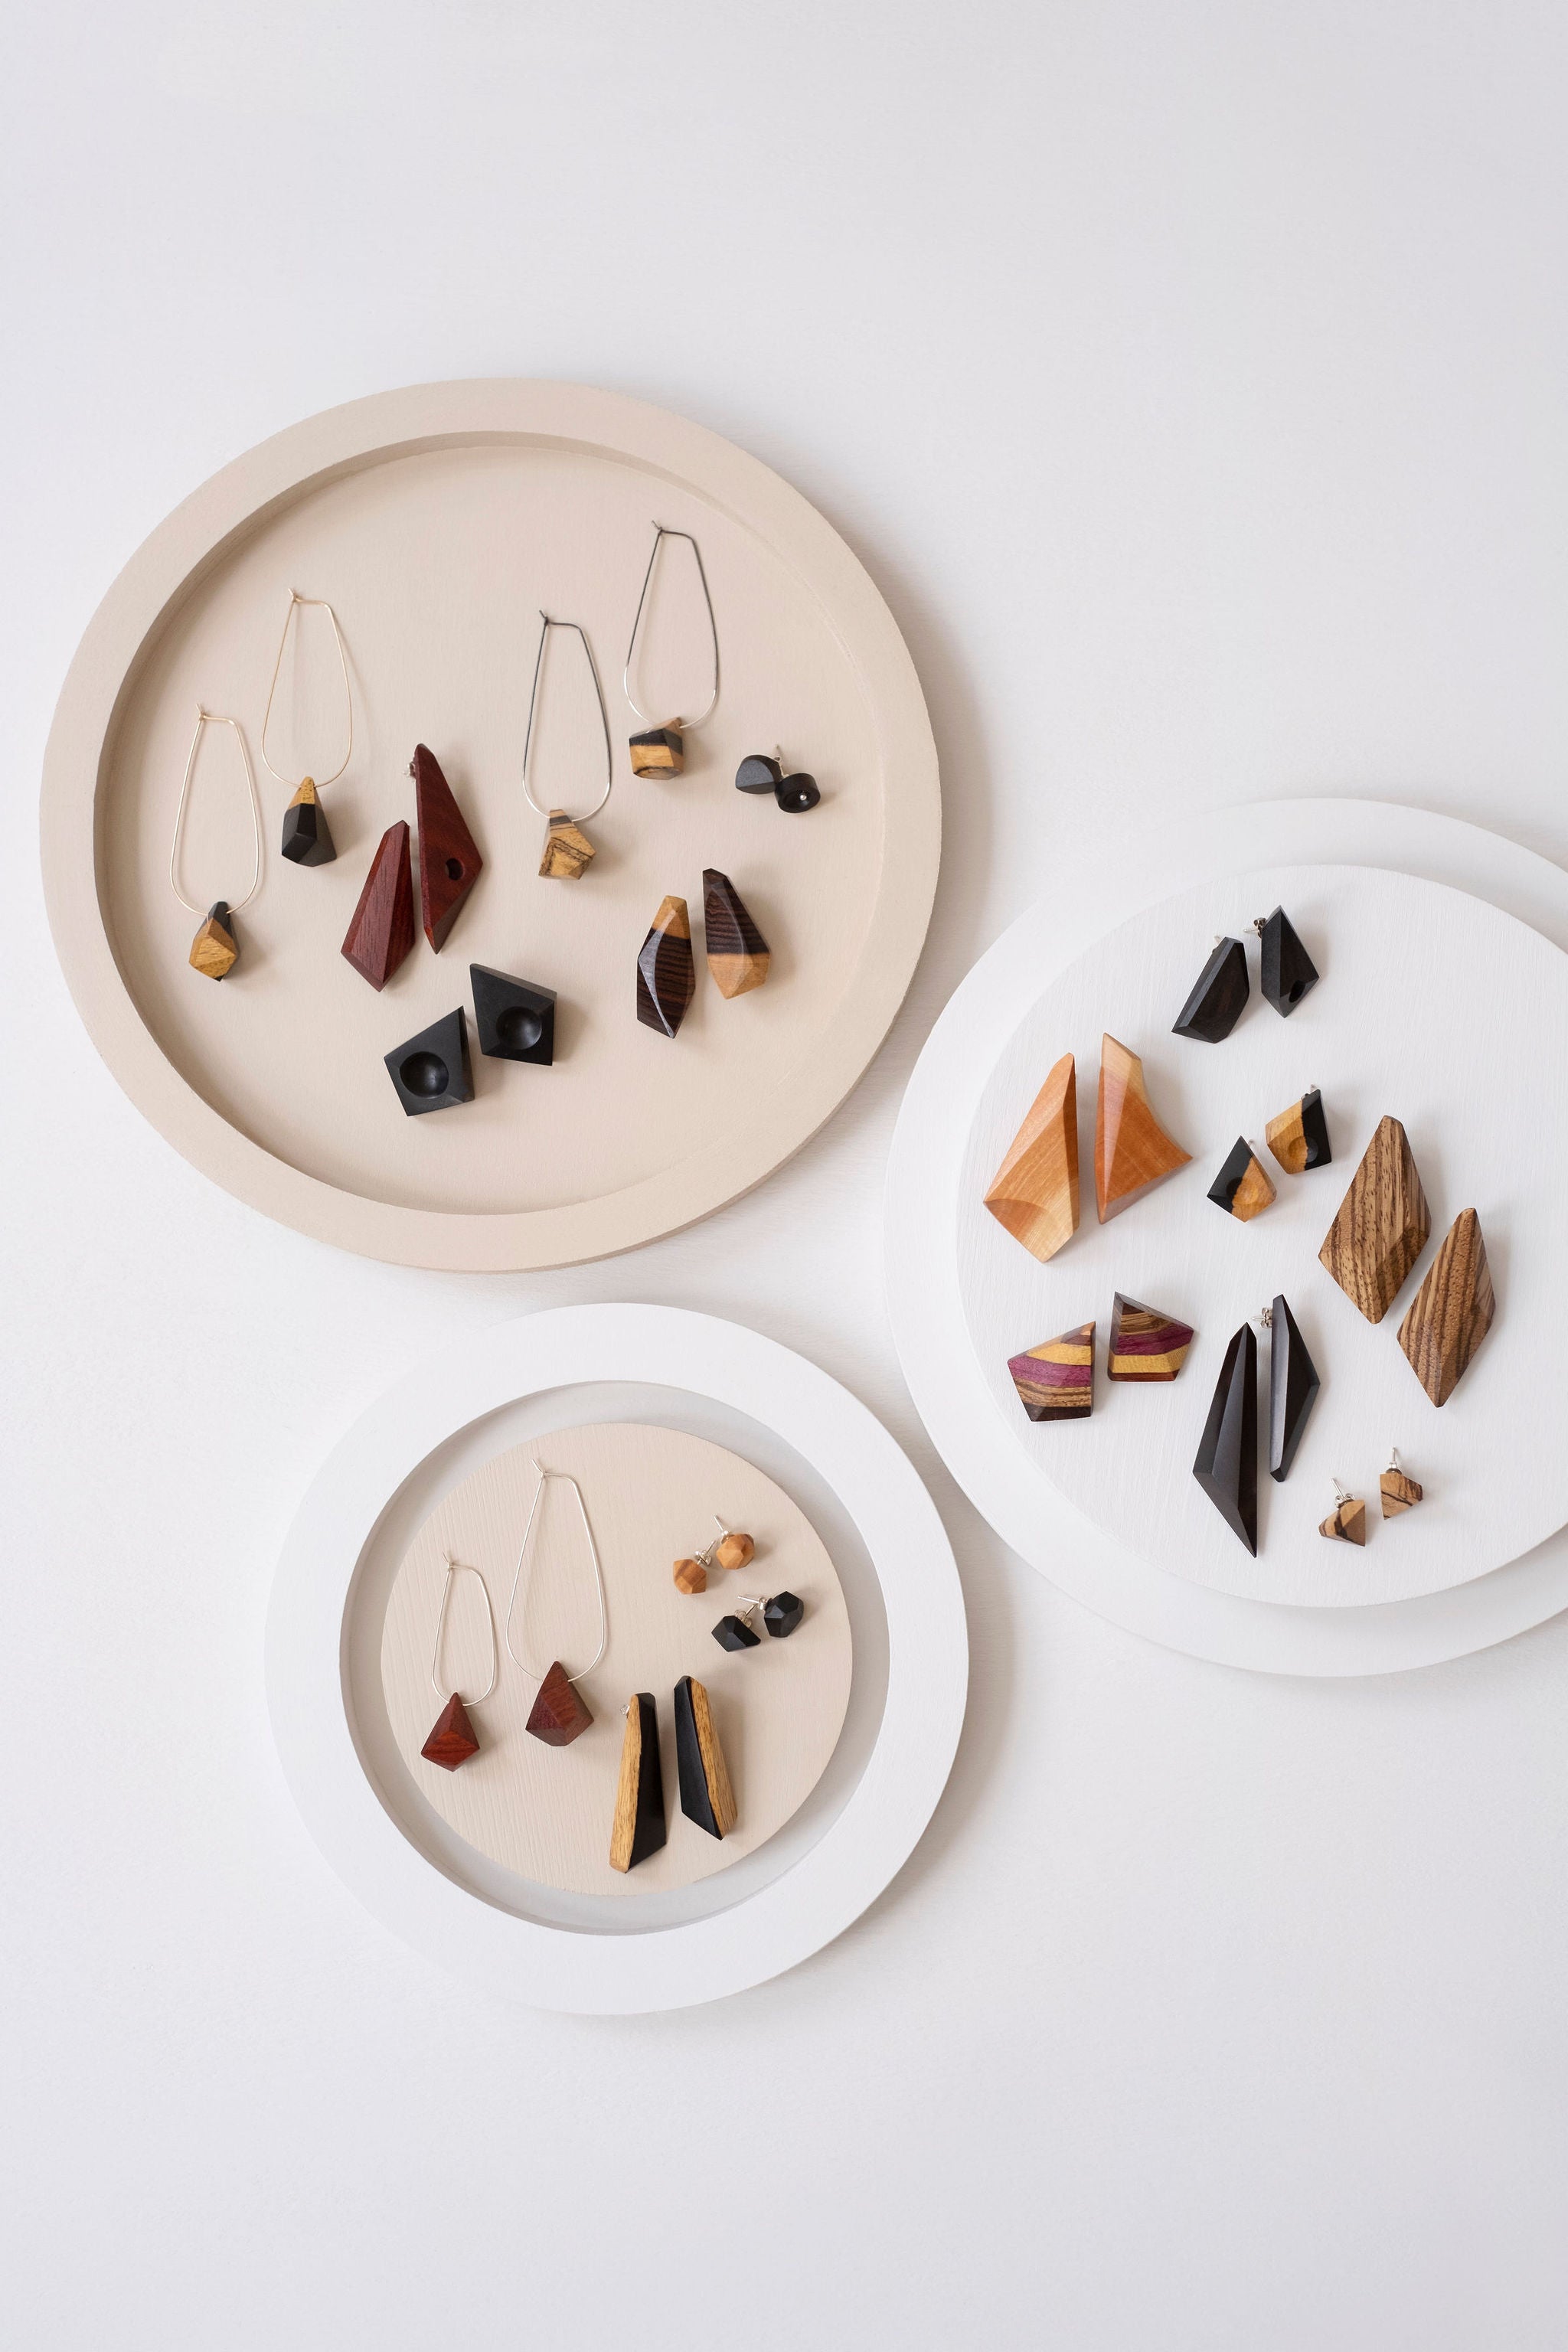 3 Round displays, off white background with various wood earrings on the displays. 